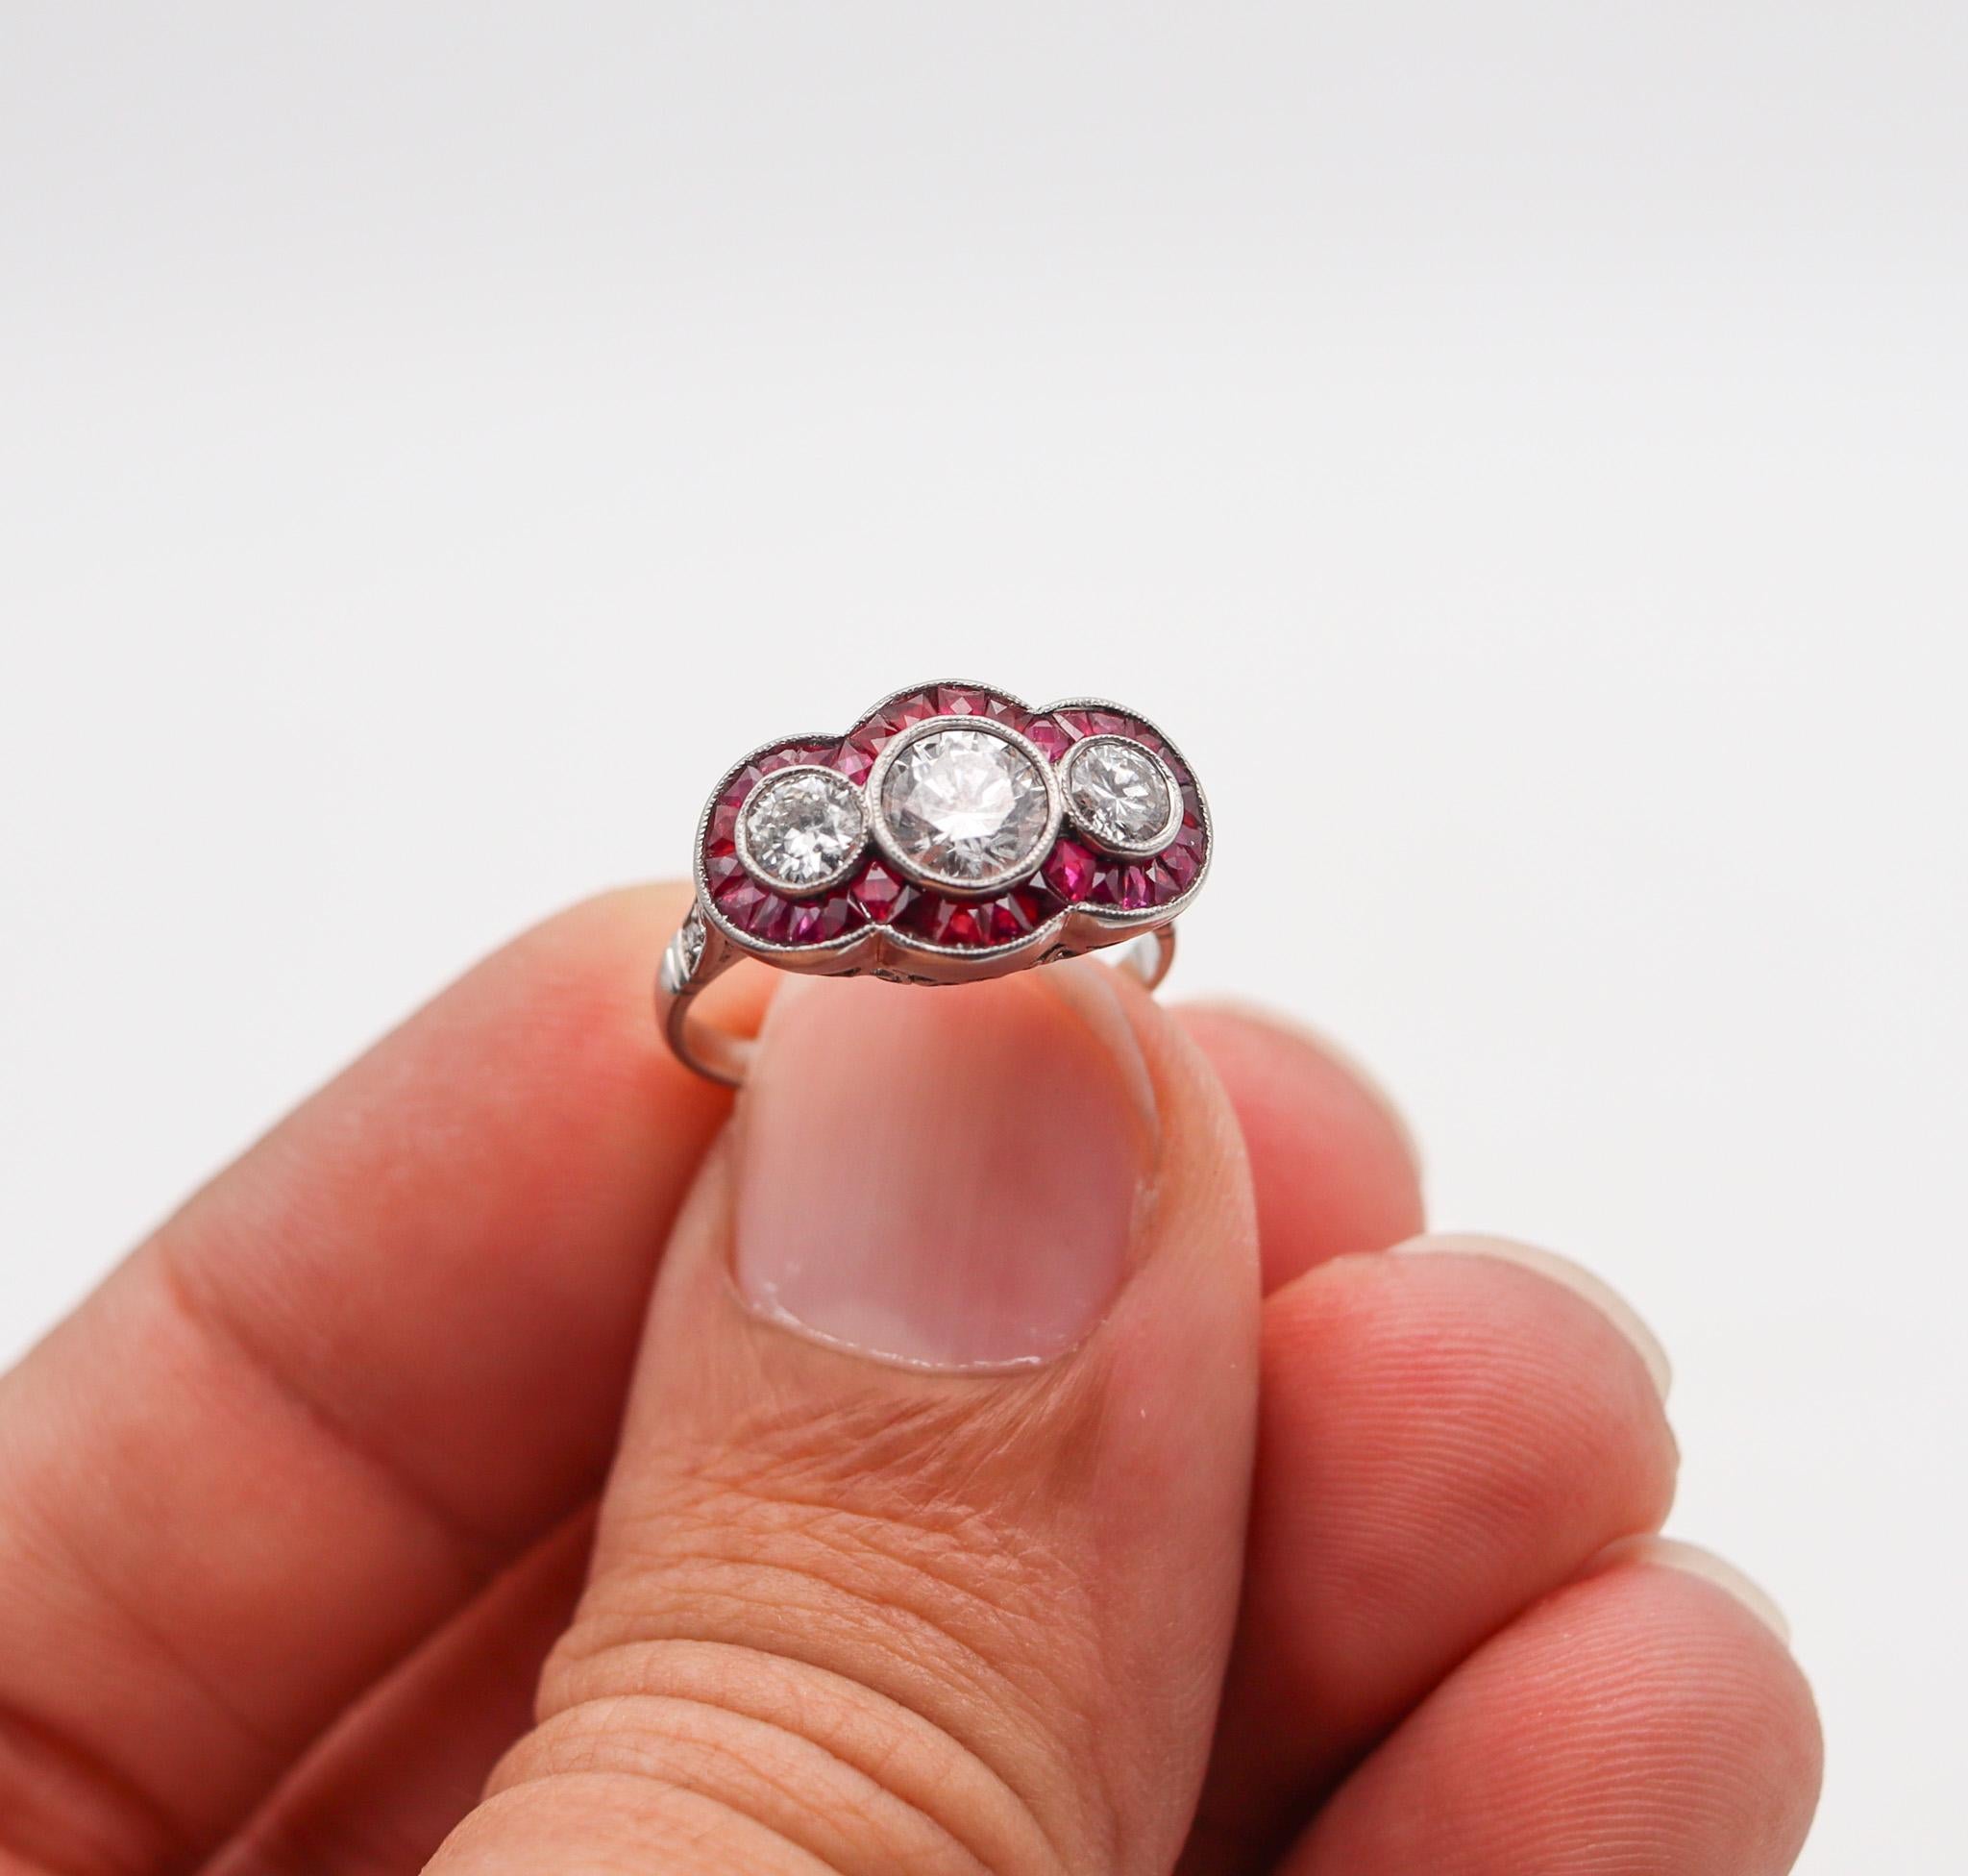 Art Deco 1925 Three Gems Ring In Platinum With 1.42 Ctw Diamonds And Rubies For Sale 1